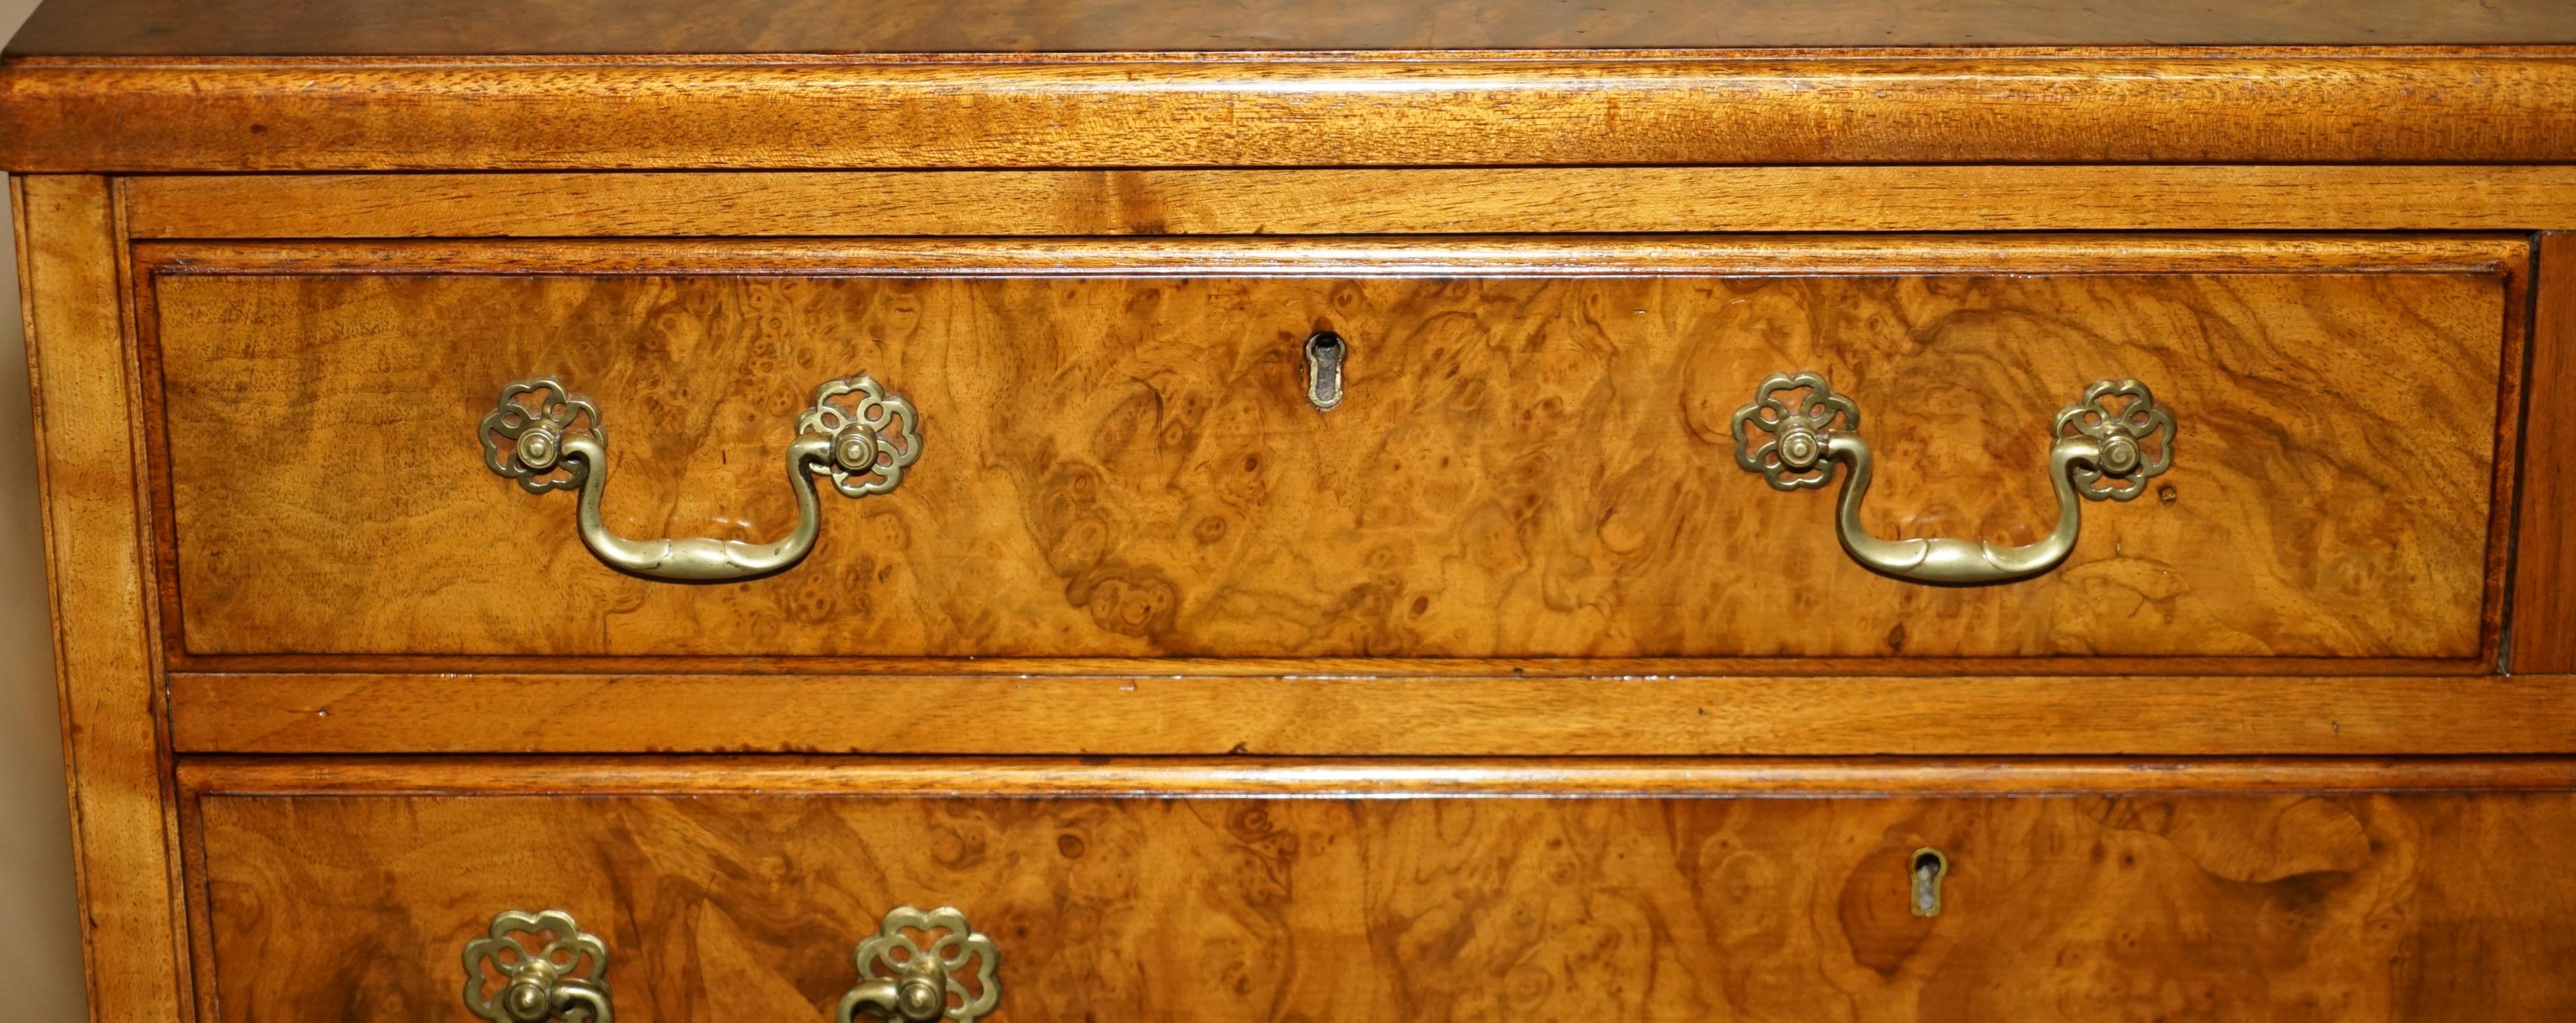 Stunning Large Sideboard Sized Bank or Chest of Drawers in Burr and Burl Walnut 2